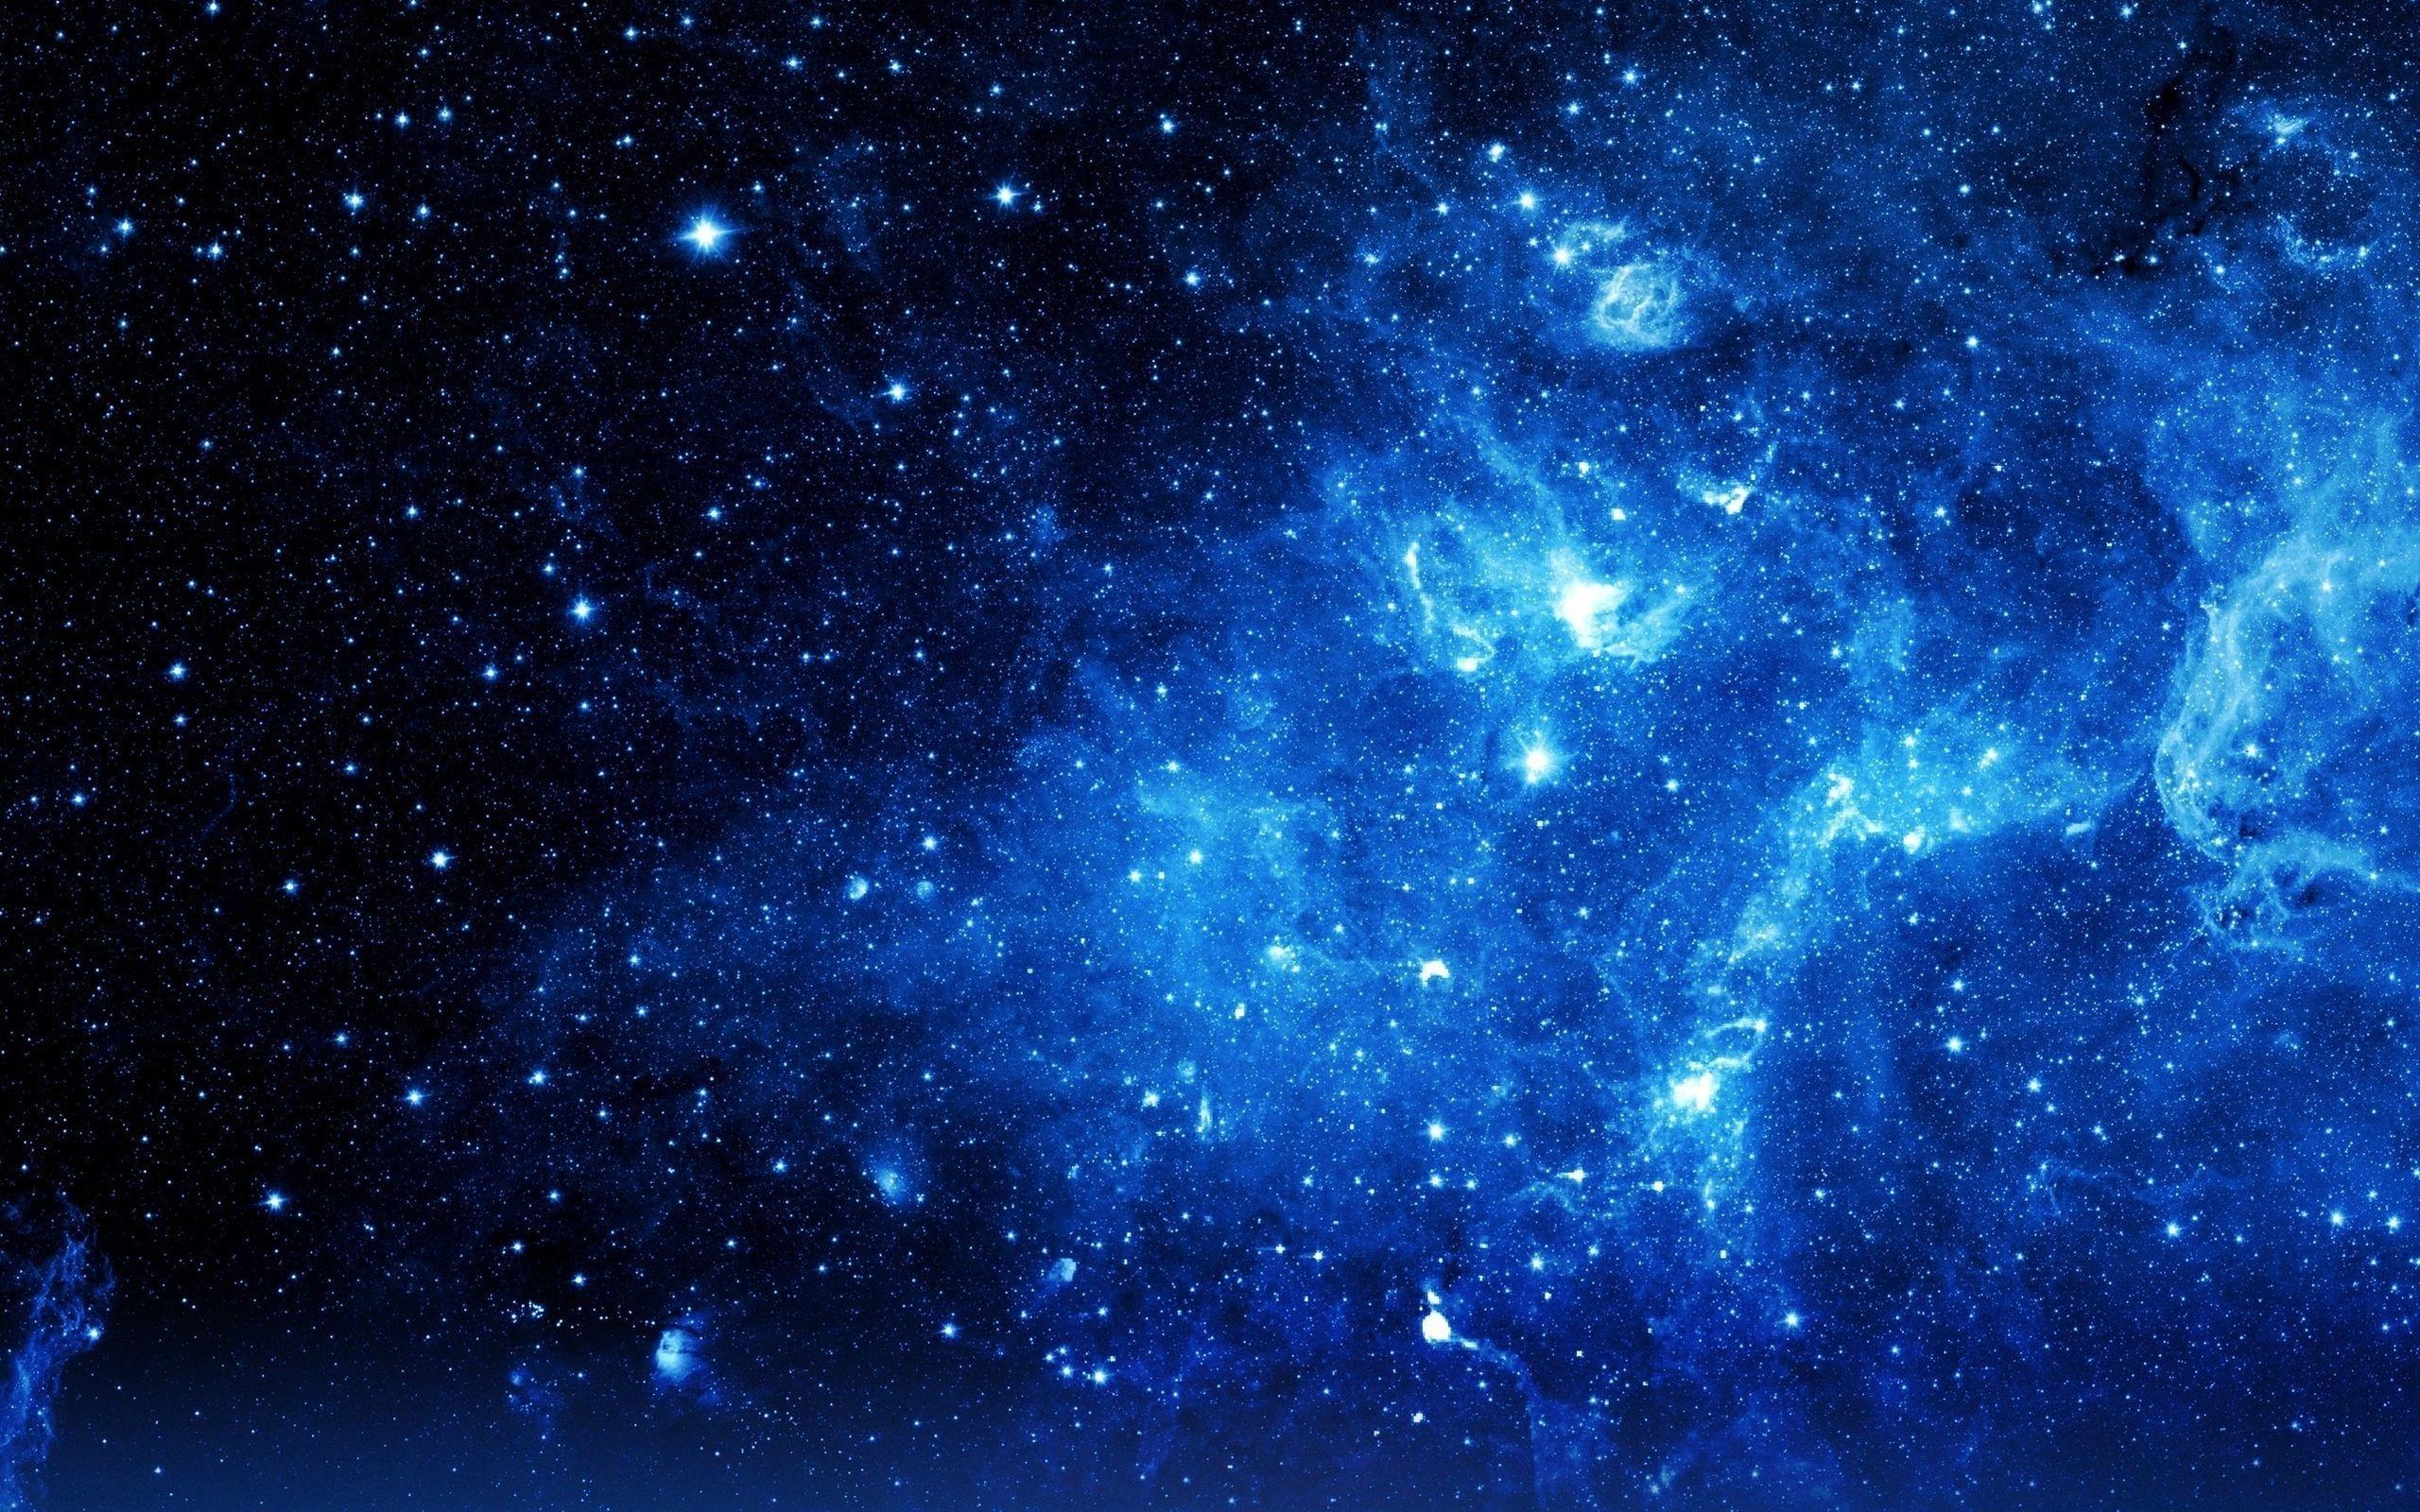 Blue Galaxy Wallpapers Top Free Blue Galaxy Backgrounds Wallpaperaccess Wallpapers full hd » blue galaxy wallpapers. blue galaxy wallpapers top free blue